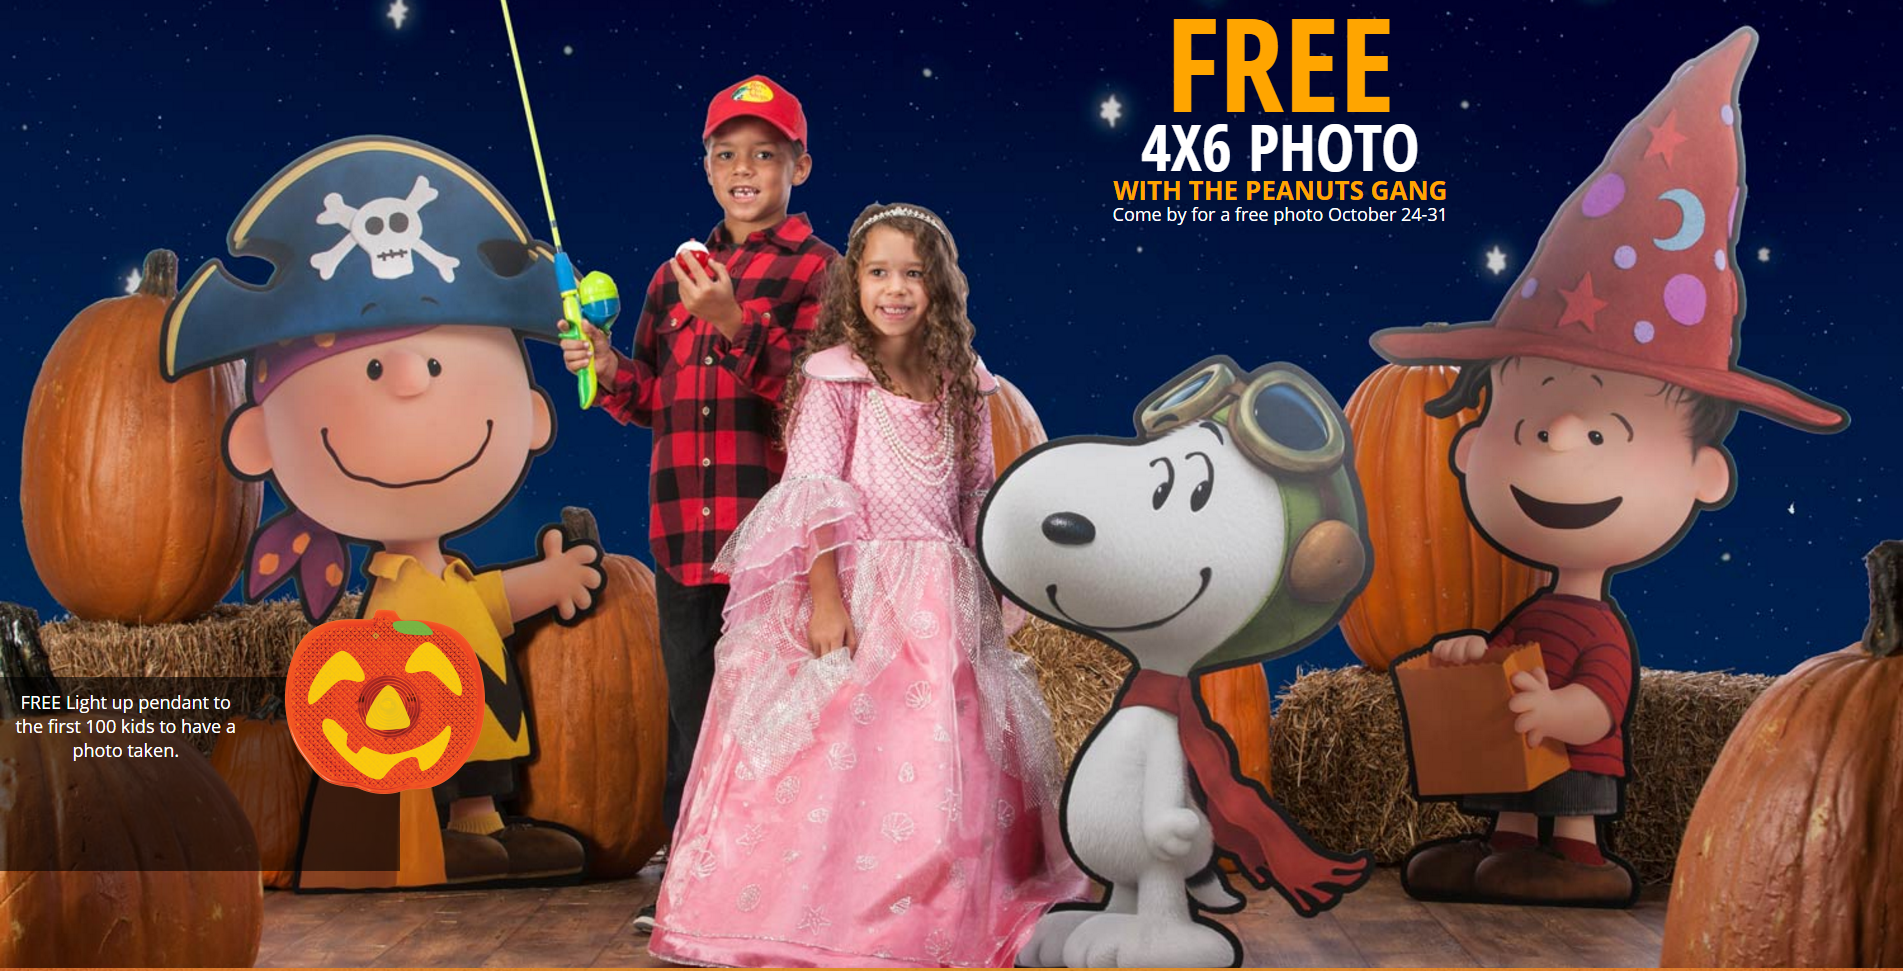 bass pro halloween 2020 photos Free 4x6 Peanuts Halloween Photo Crafts And More At Bass Pro Shops Peanuts bass pro halloween 2020 photos